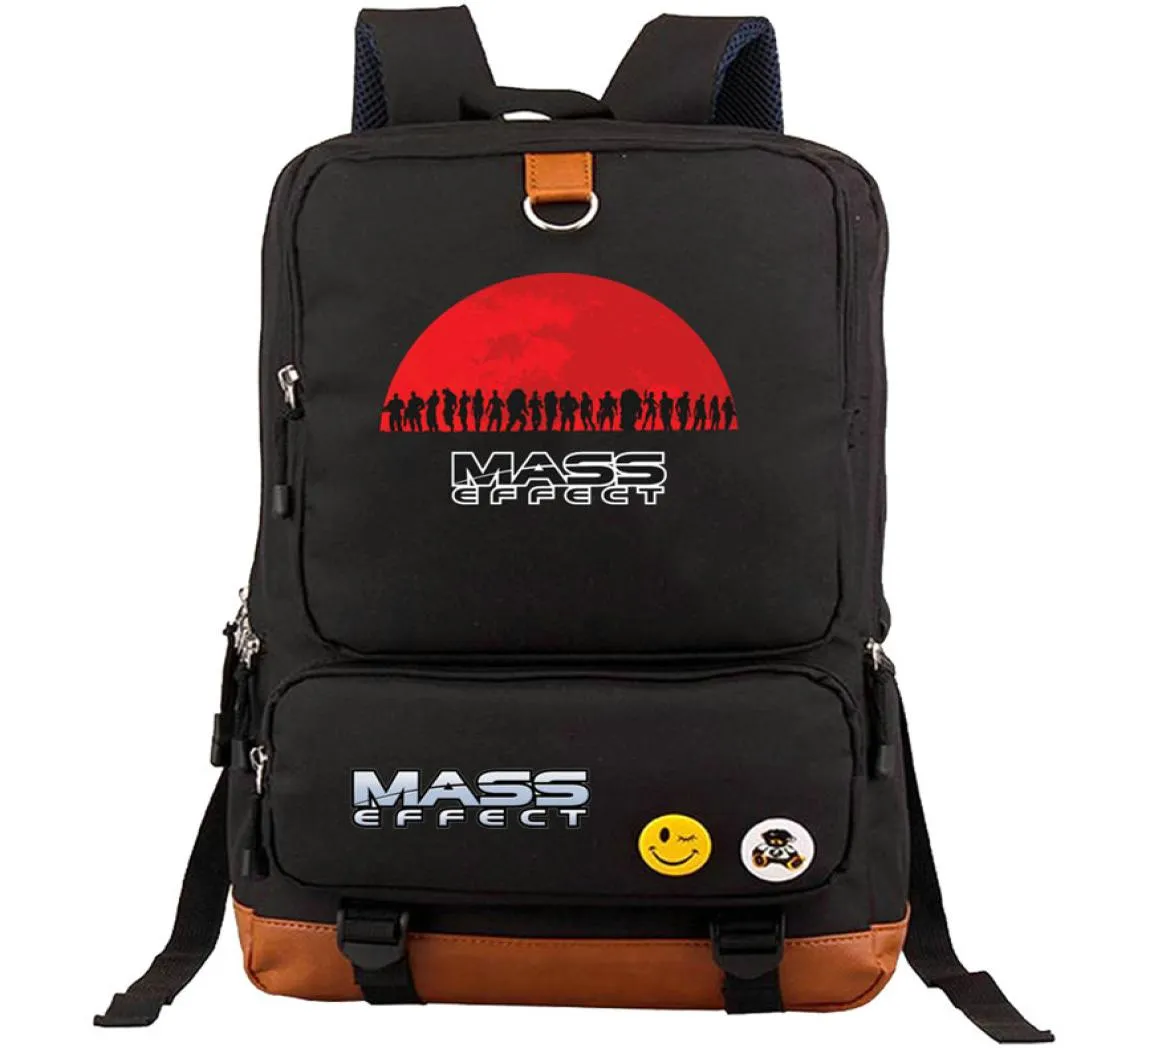 Mass Effect рюкзак Me1 DayPack Shoot N7 Game School School School School Rucksack Sport School Bag Bag Outdoor Day Pack2015138